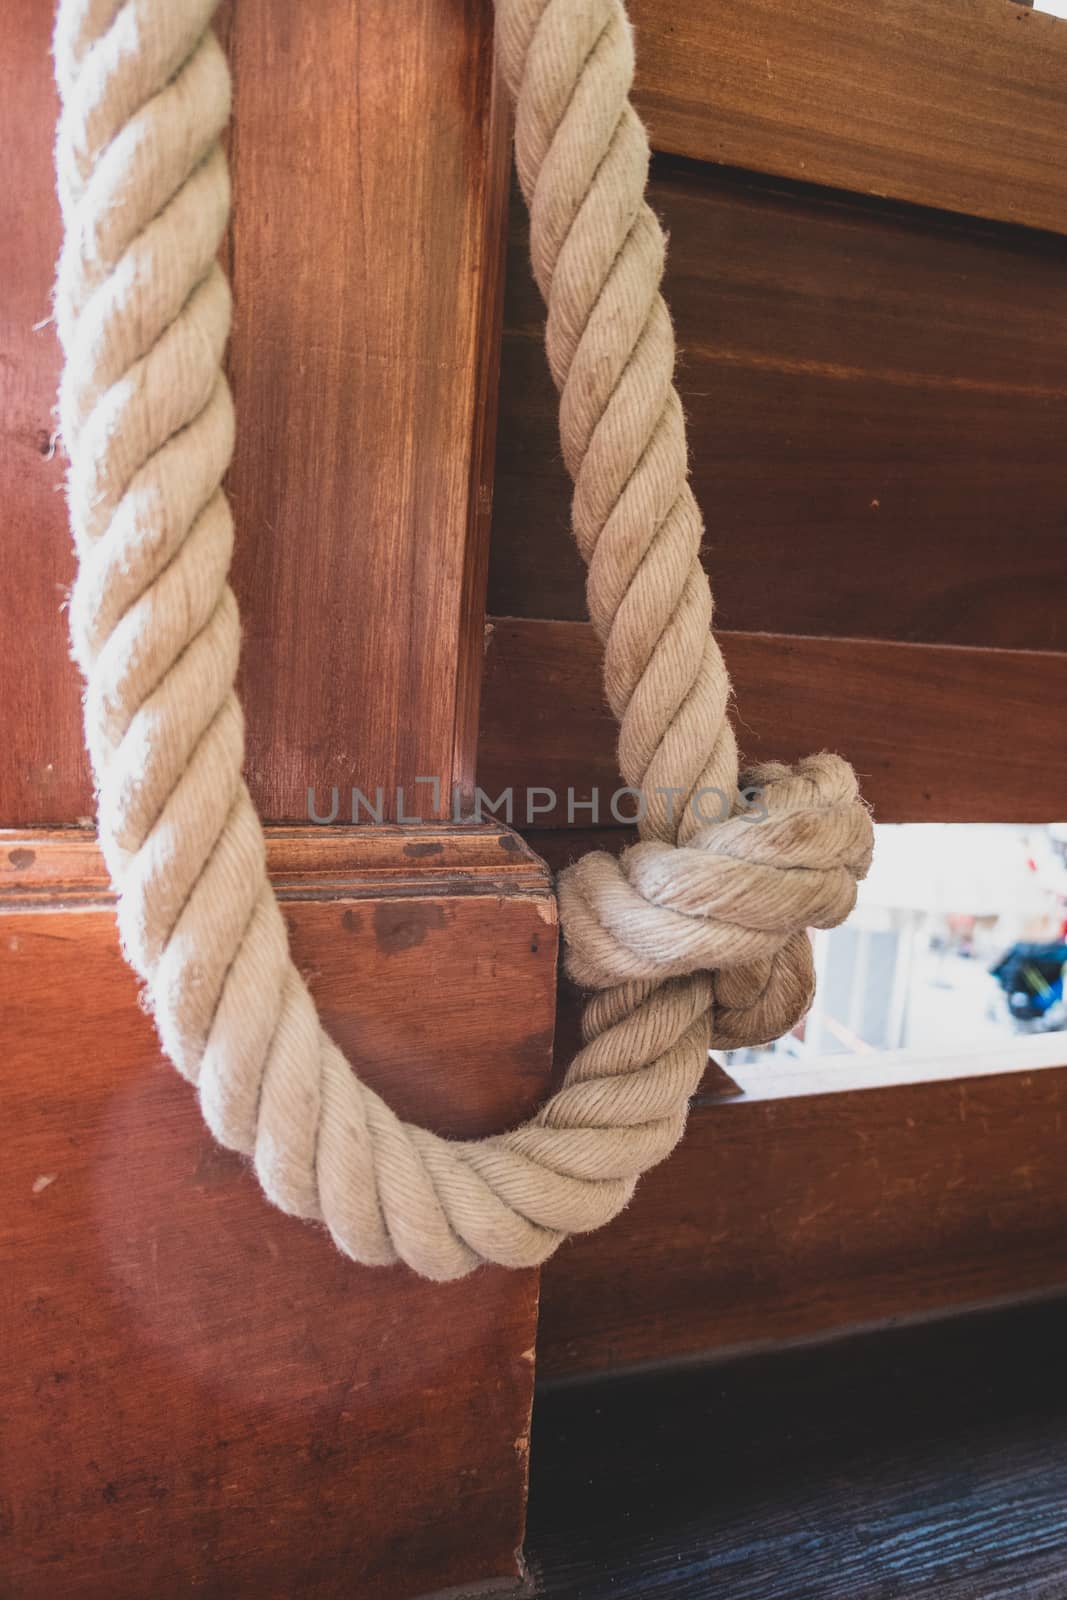 A rope made of natural fibre with a knot in the middle, which acts as a barrier rope open on a wooden mast.